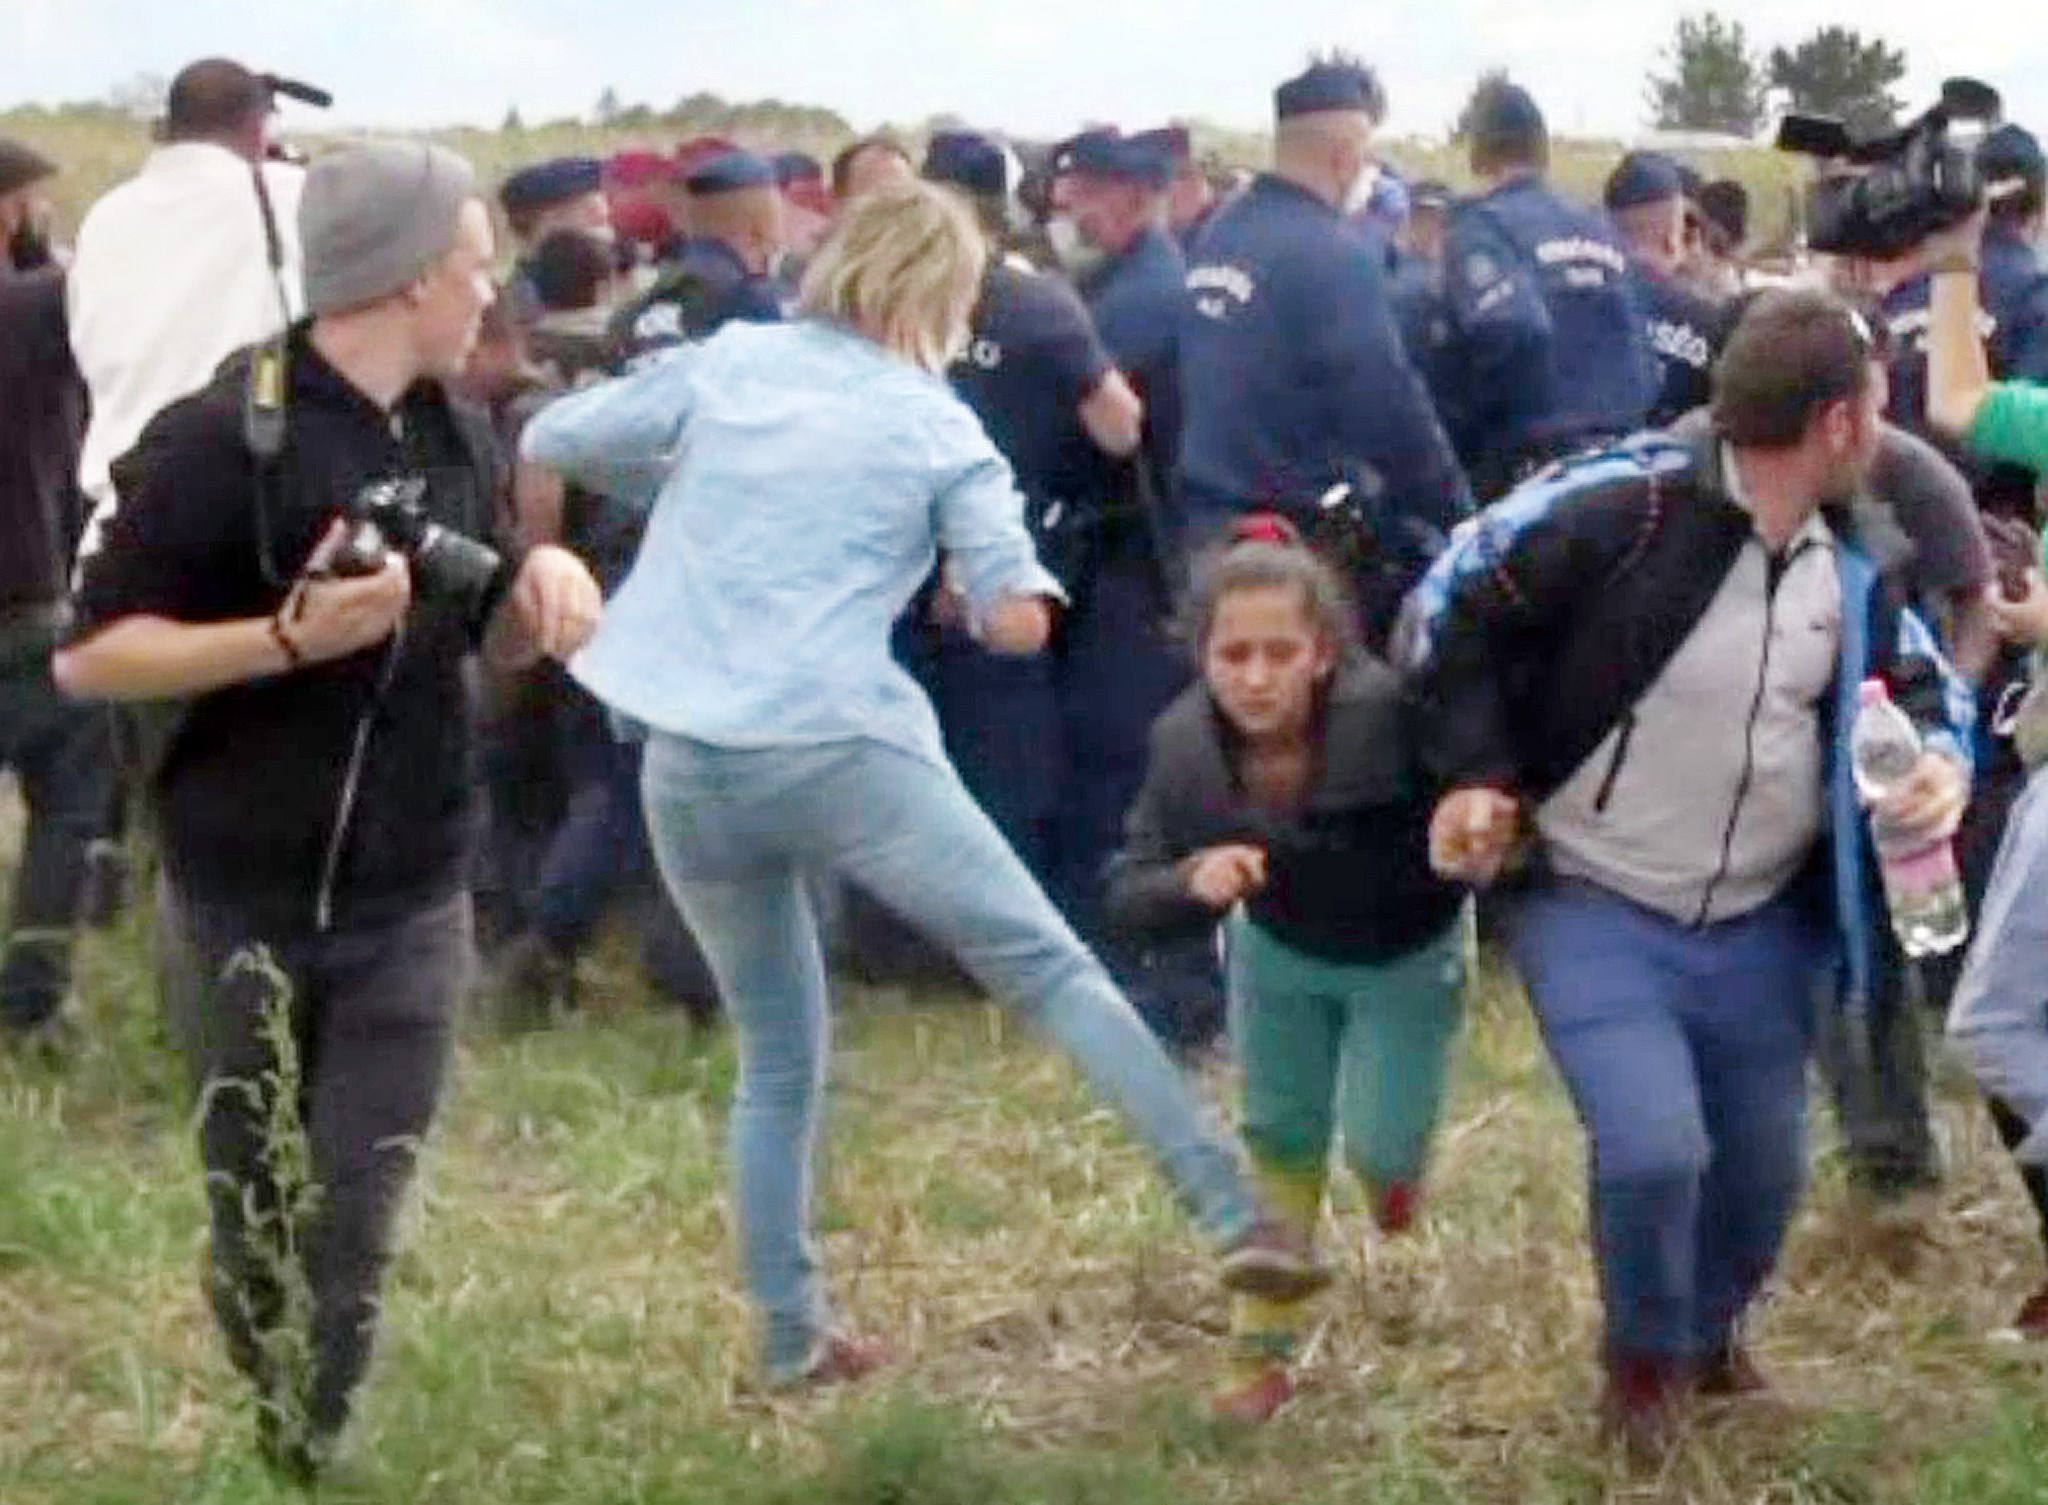 This video grab made on Sept. 9, 2015 shows Petra Laszlo kicking a child as she run with other migrants from a police line during disturbances in Roszke, southern Hungary. (AFP/Getty Images)